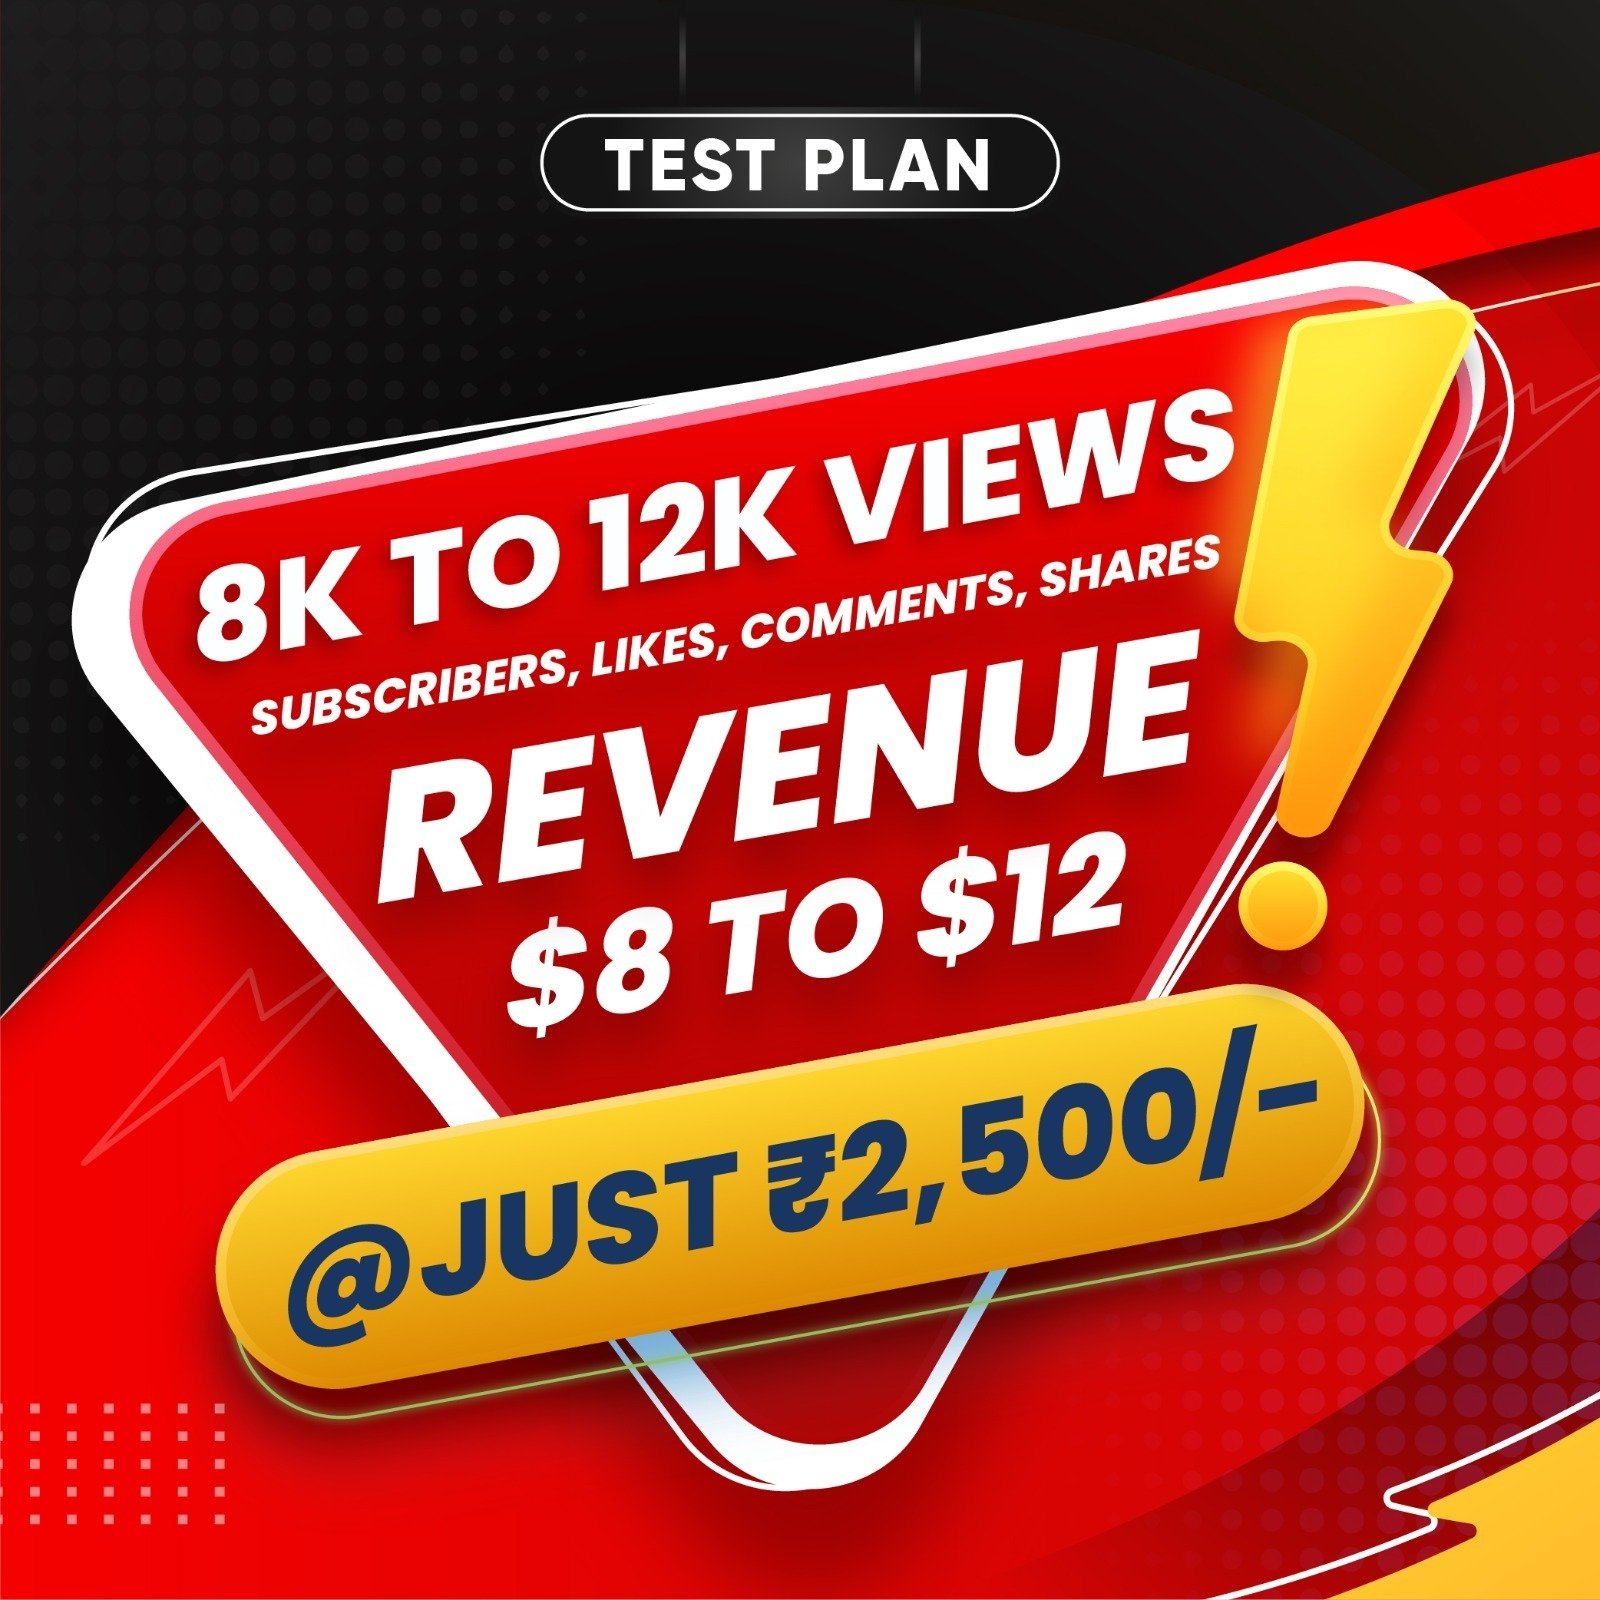 8K To 12K Real YouTube Views With $8 To $12 Revenue